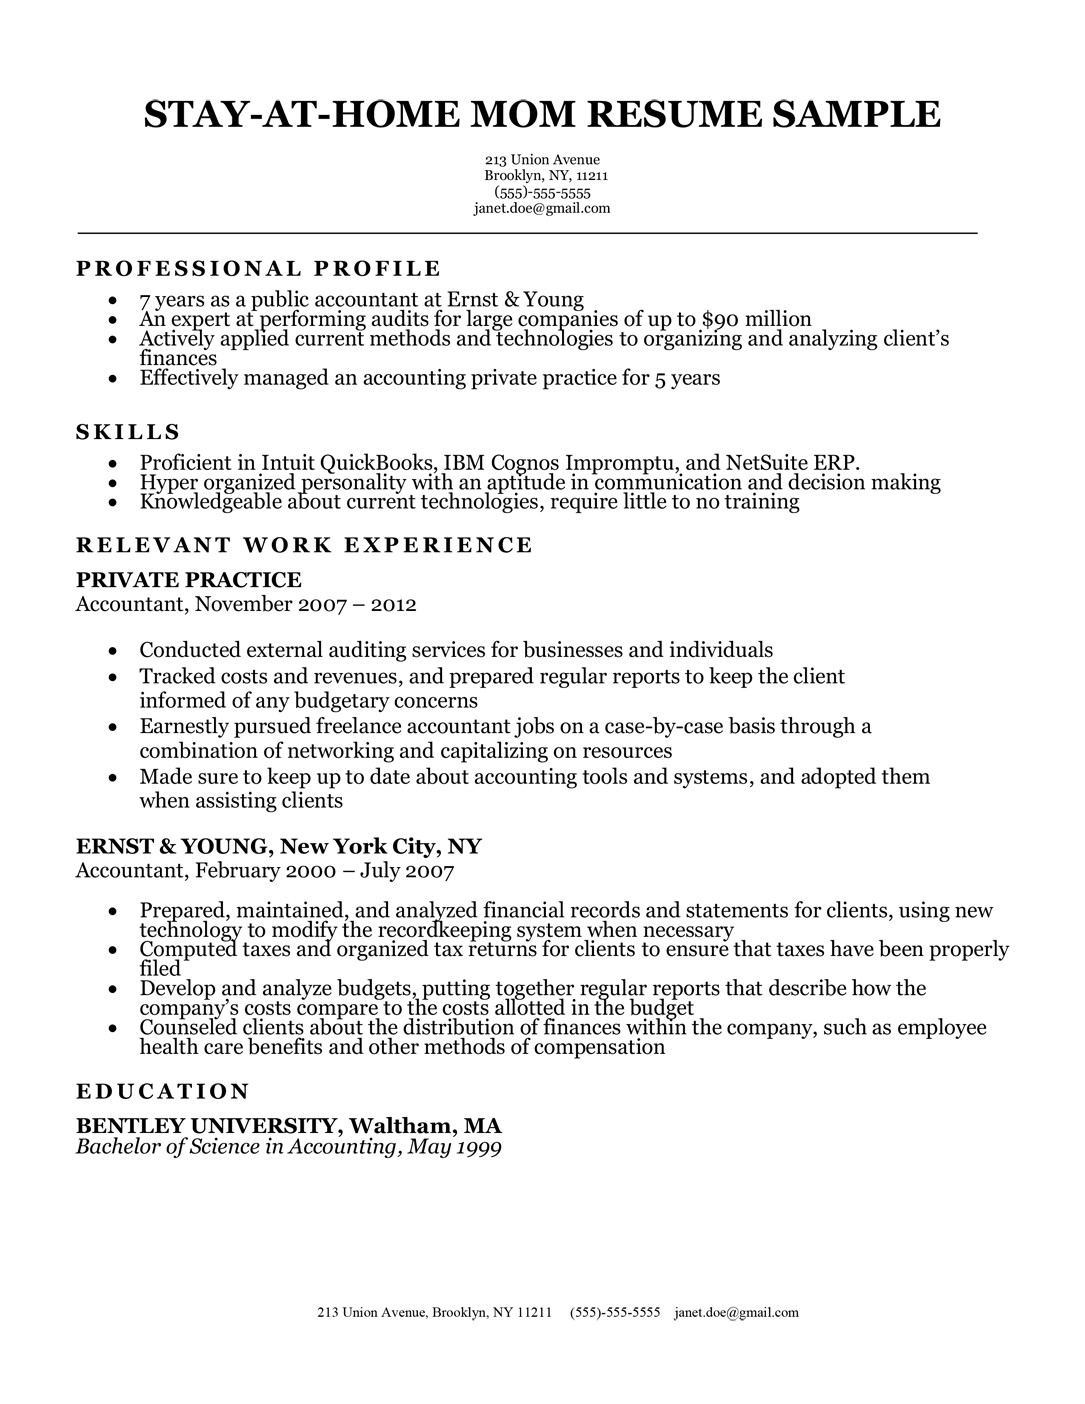 Stay at Home Mom Resume Example Sample Stay at Home Mom Resume Sample & Writing Tips